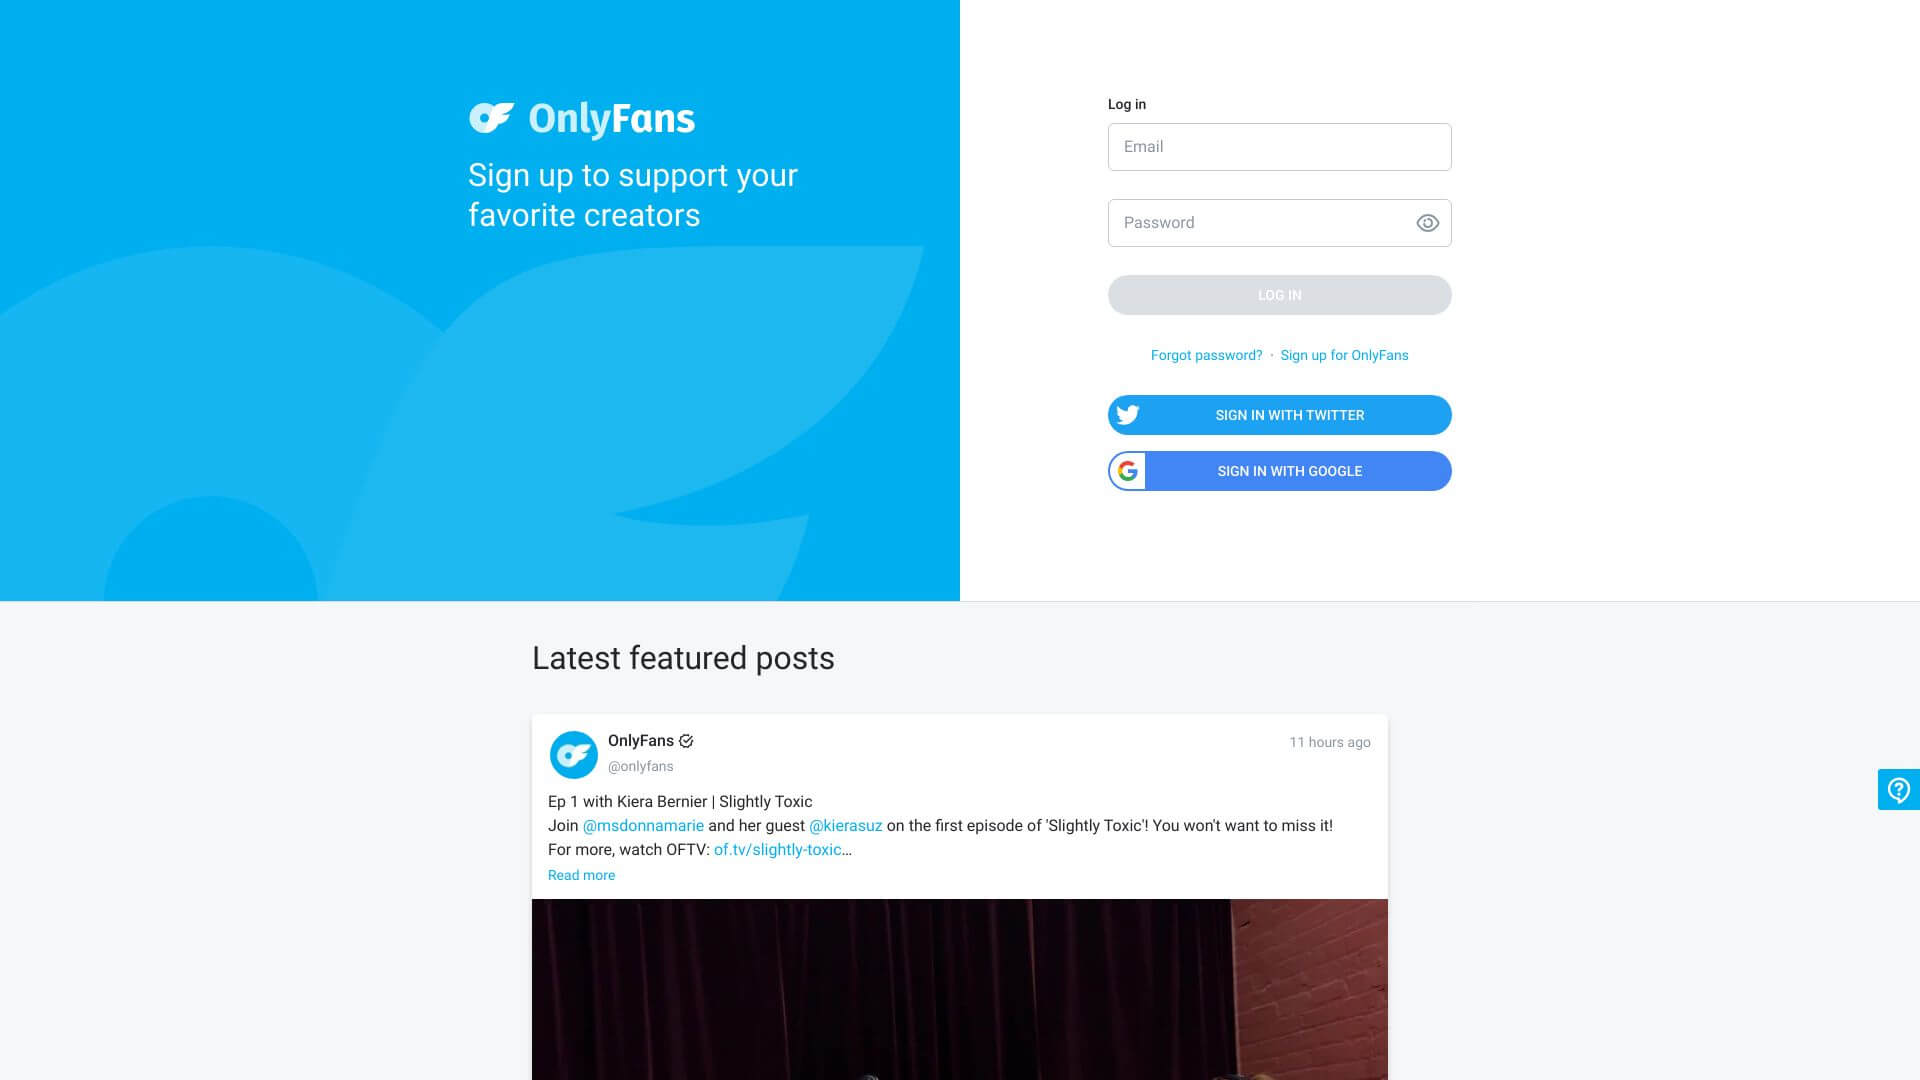 OnlyFans is the best-known platform for adult content creators